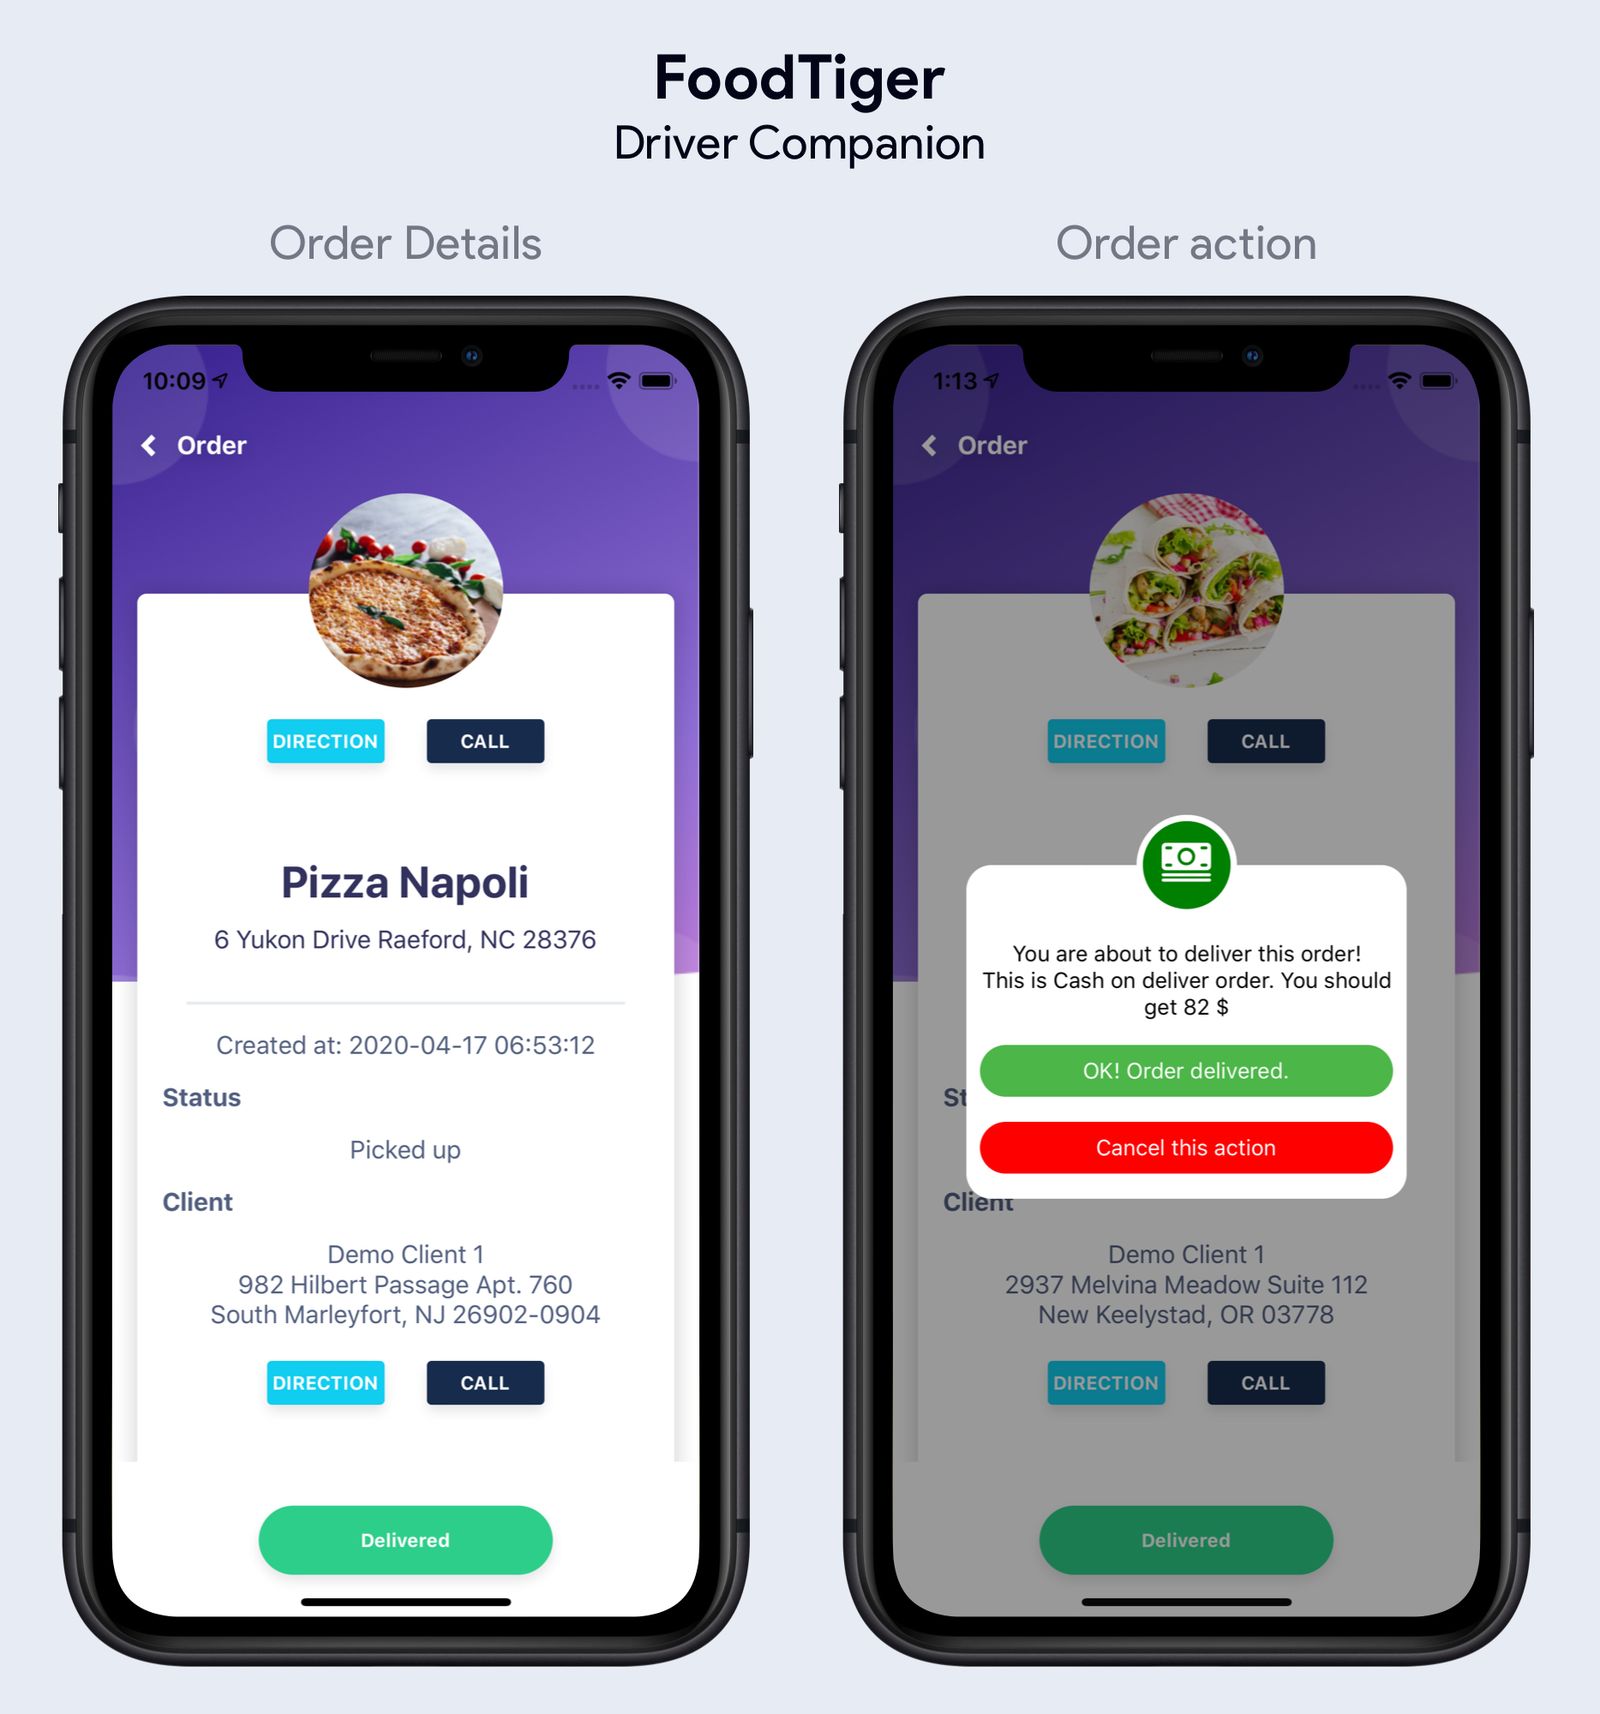 Driver Companion App for FoodTiger Delivery - 6